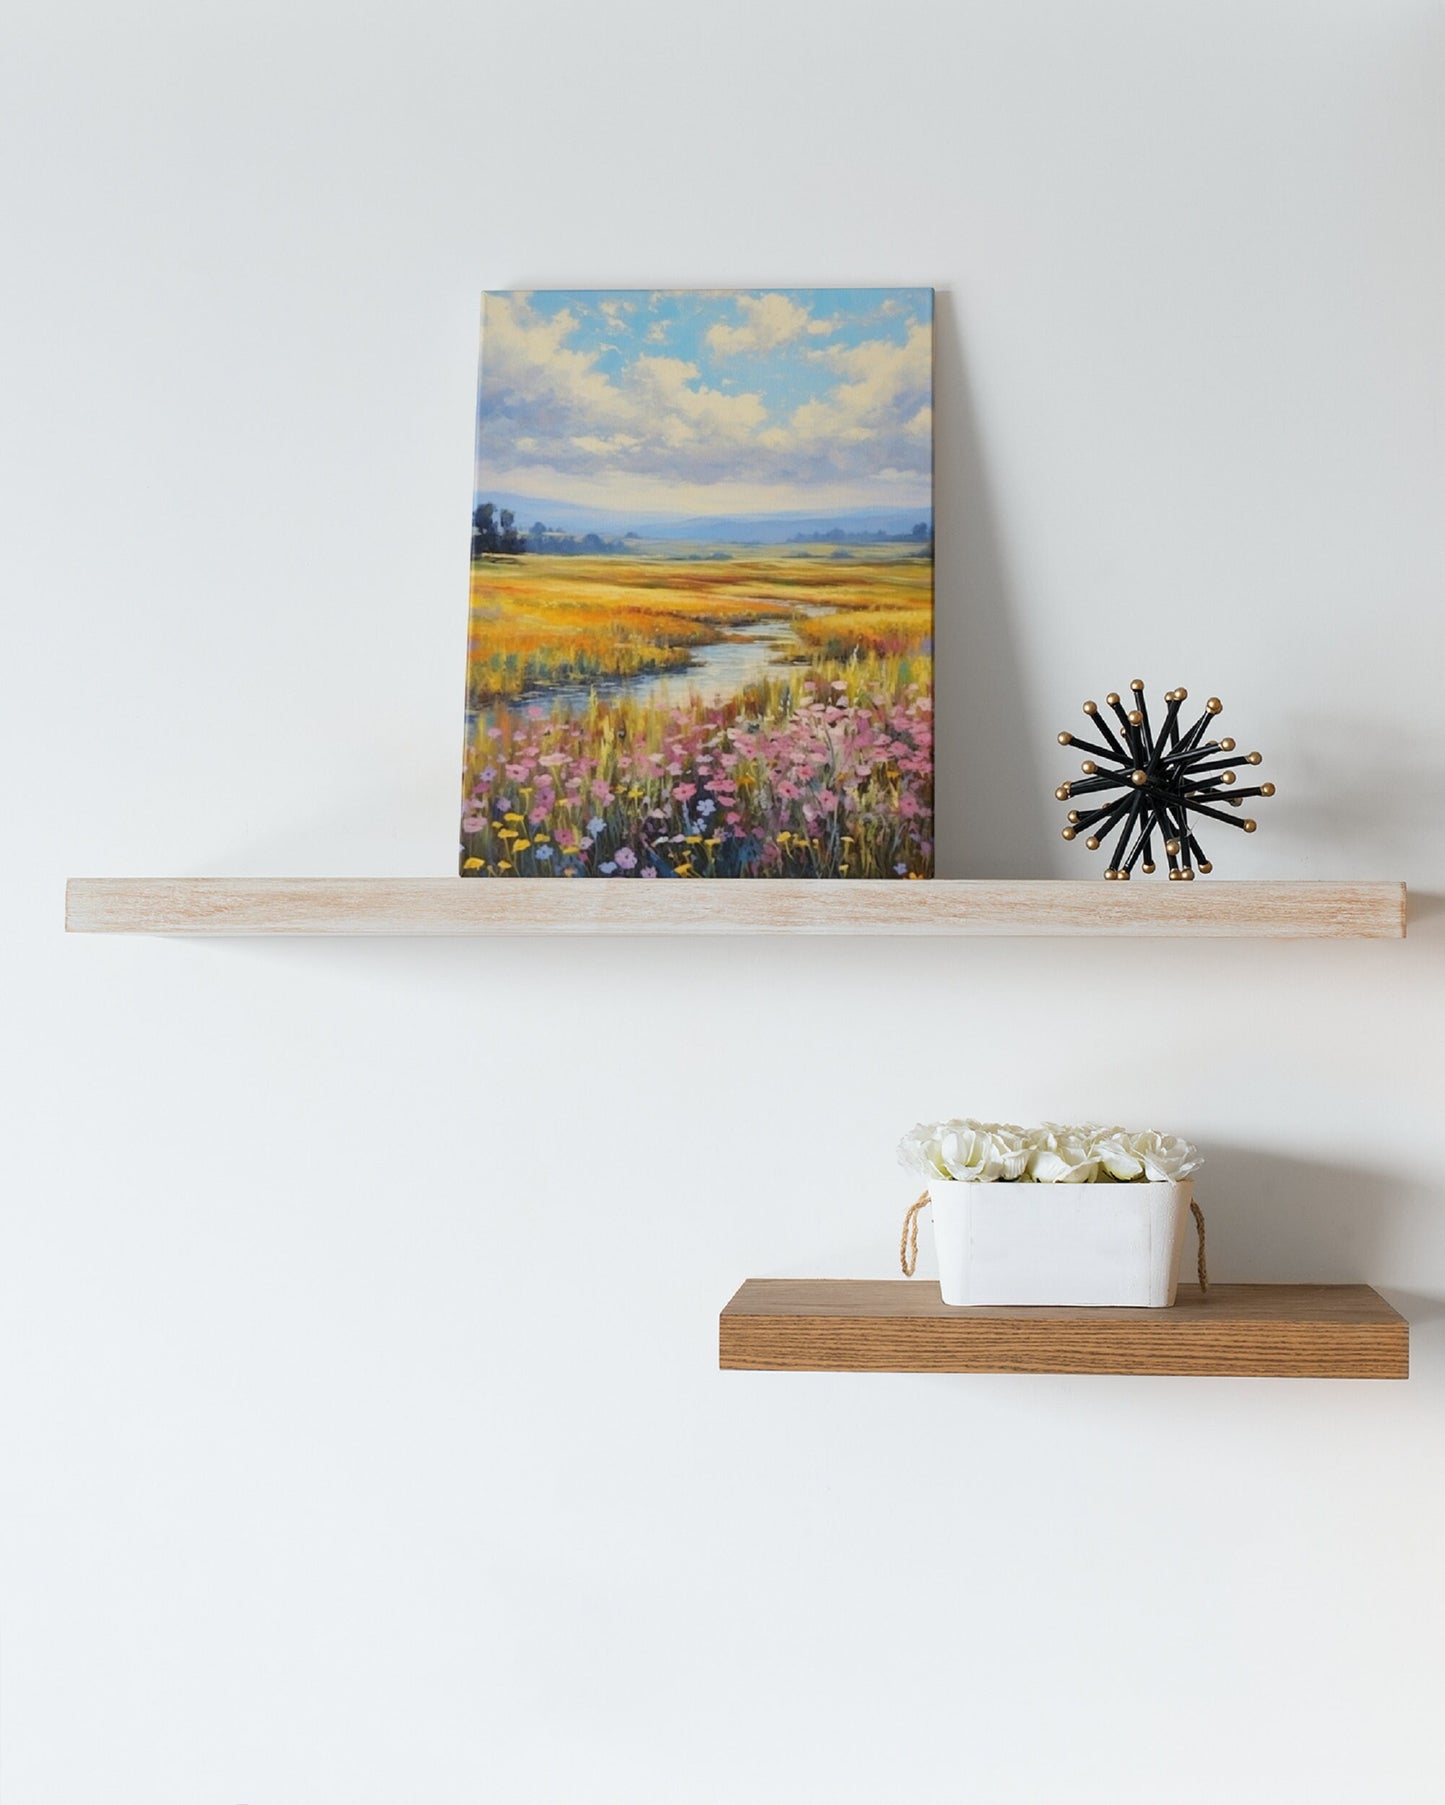 Spruce Up Your Walls with Modern Minimalist Botanical Wall Art - Framed Wildflower Art Print on Canvas for Farmhouse and Floral-themed Decor